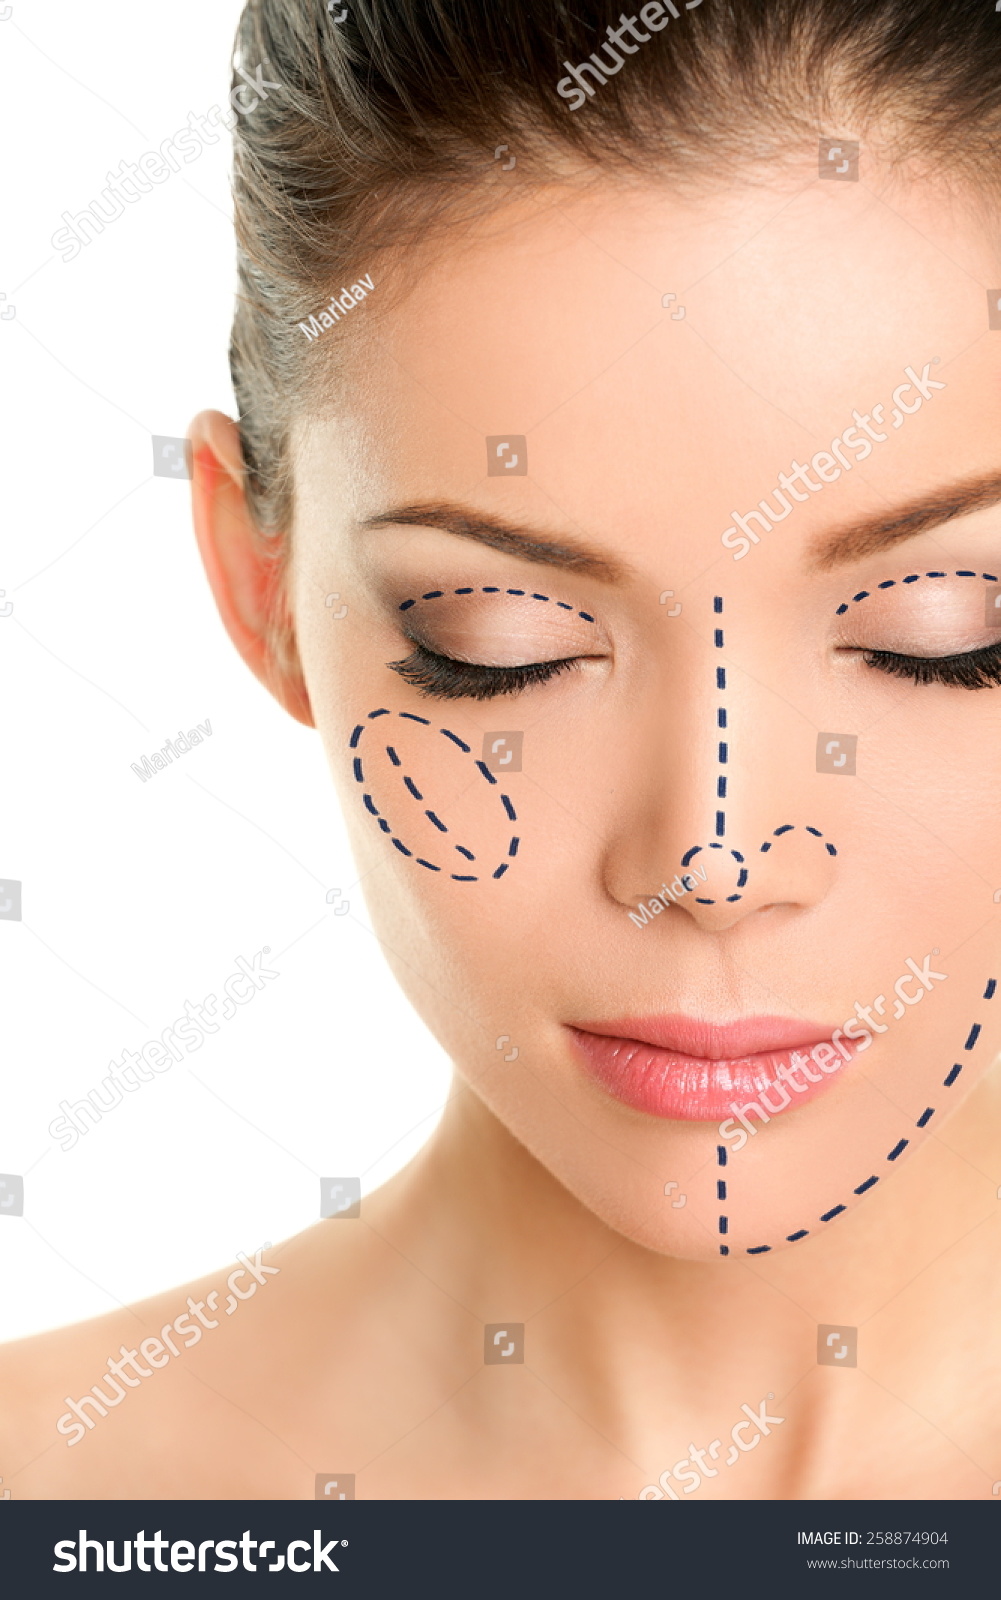 Cosmetic Surgery Of The Asian Face 14